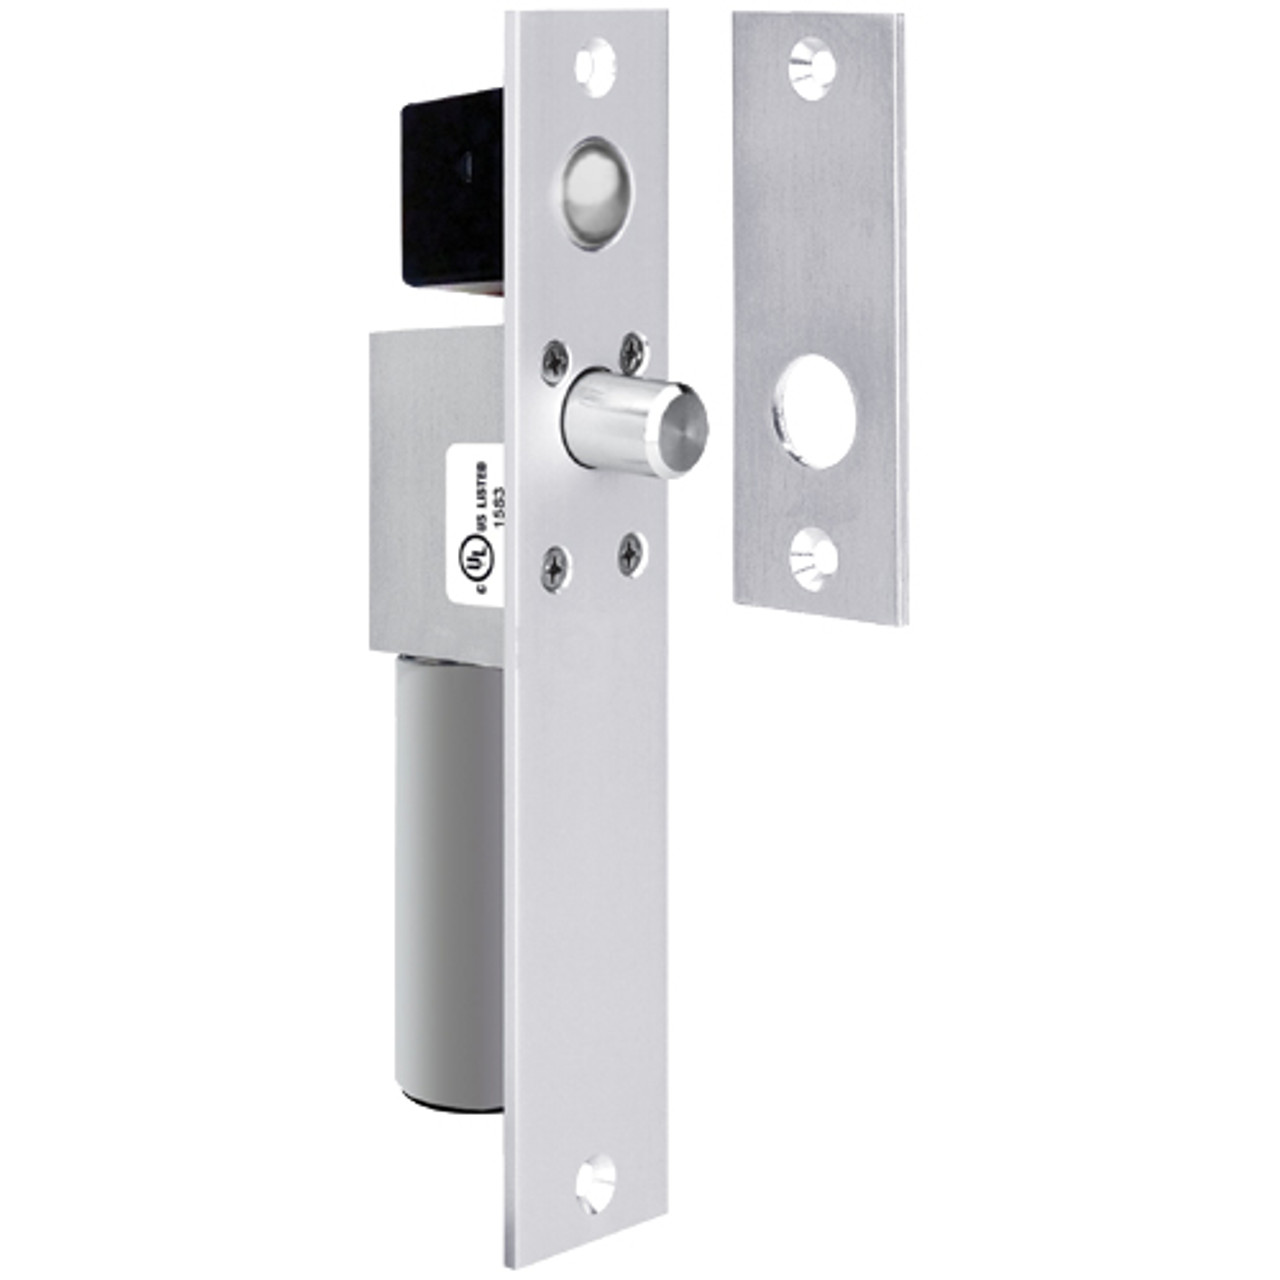 1291AHPDB SDC Failsecure Spacesaver Mortise Bolt Lock with Door Position and Bolt Position Sensor in Bright Chrome